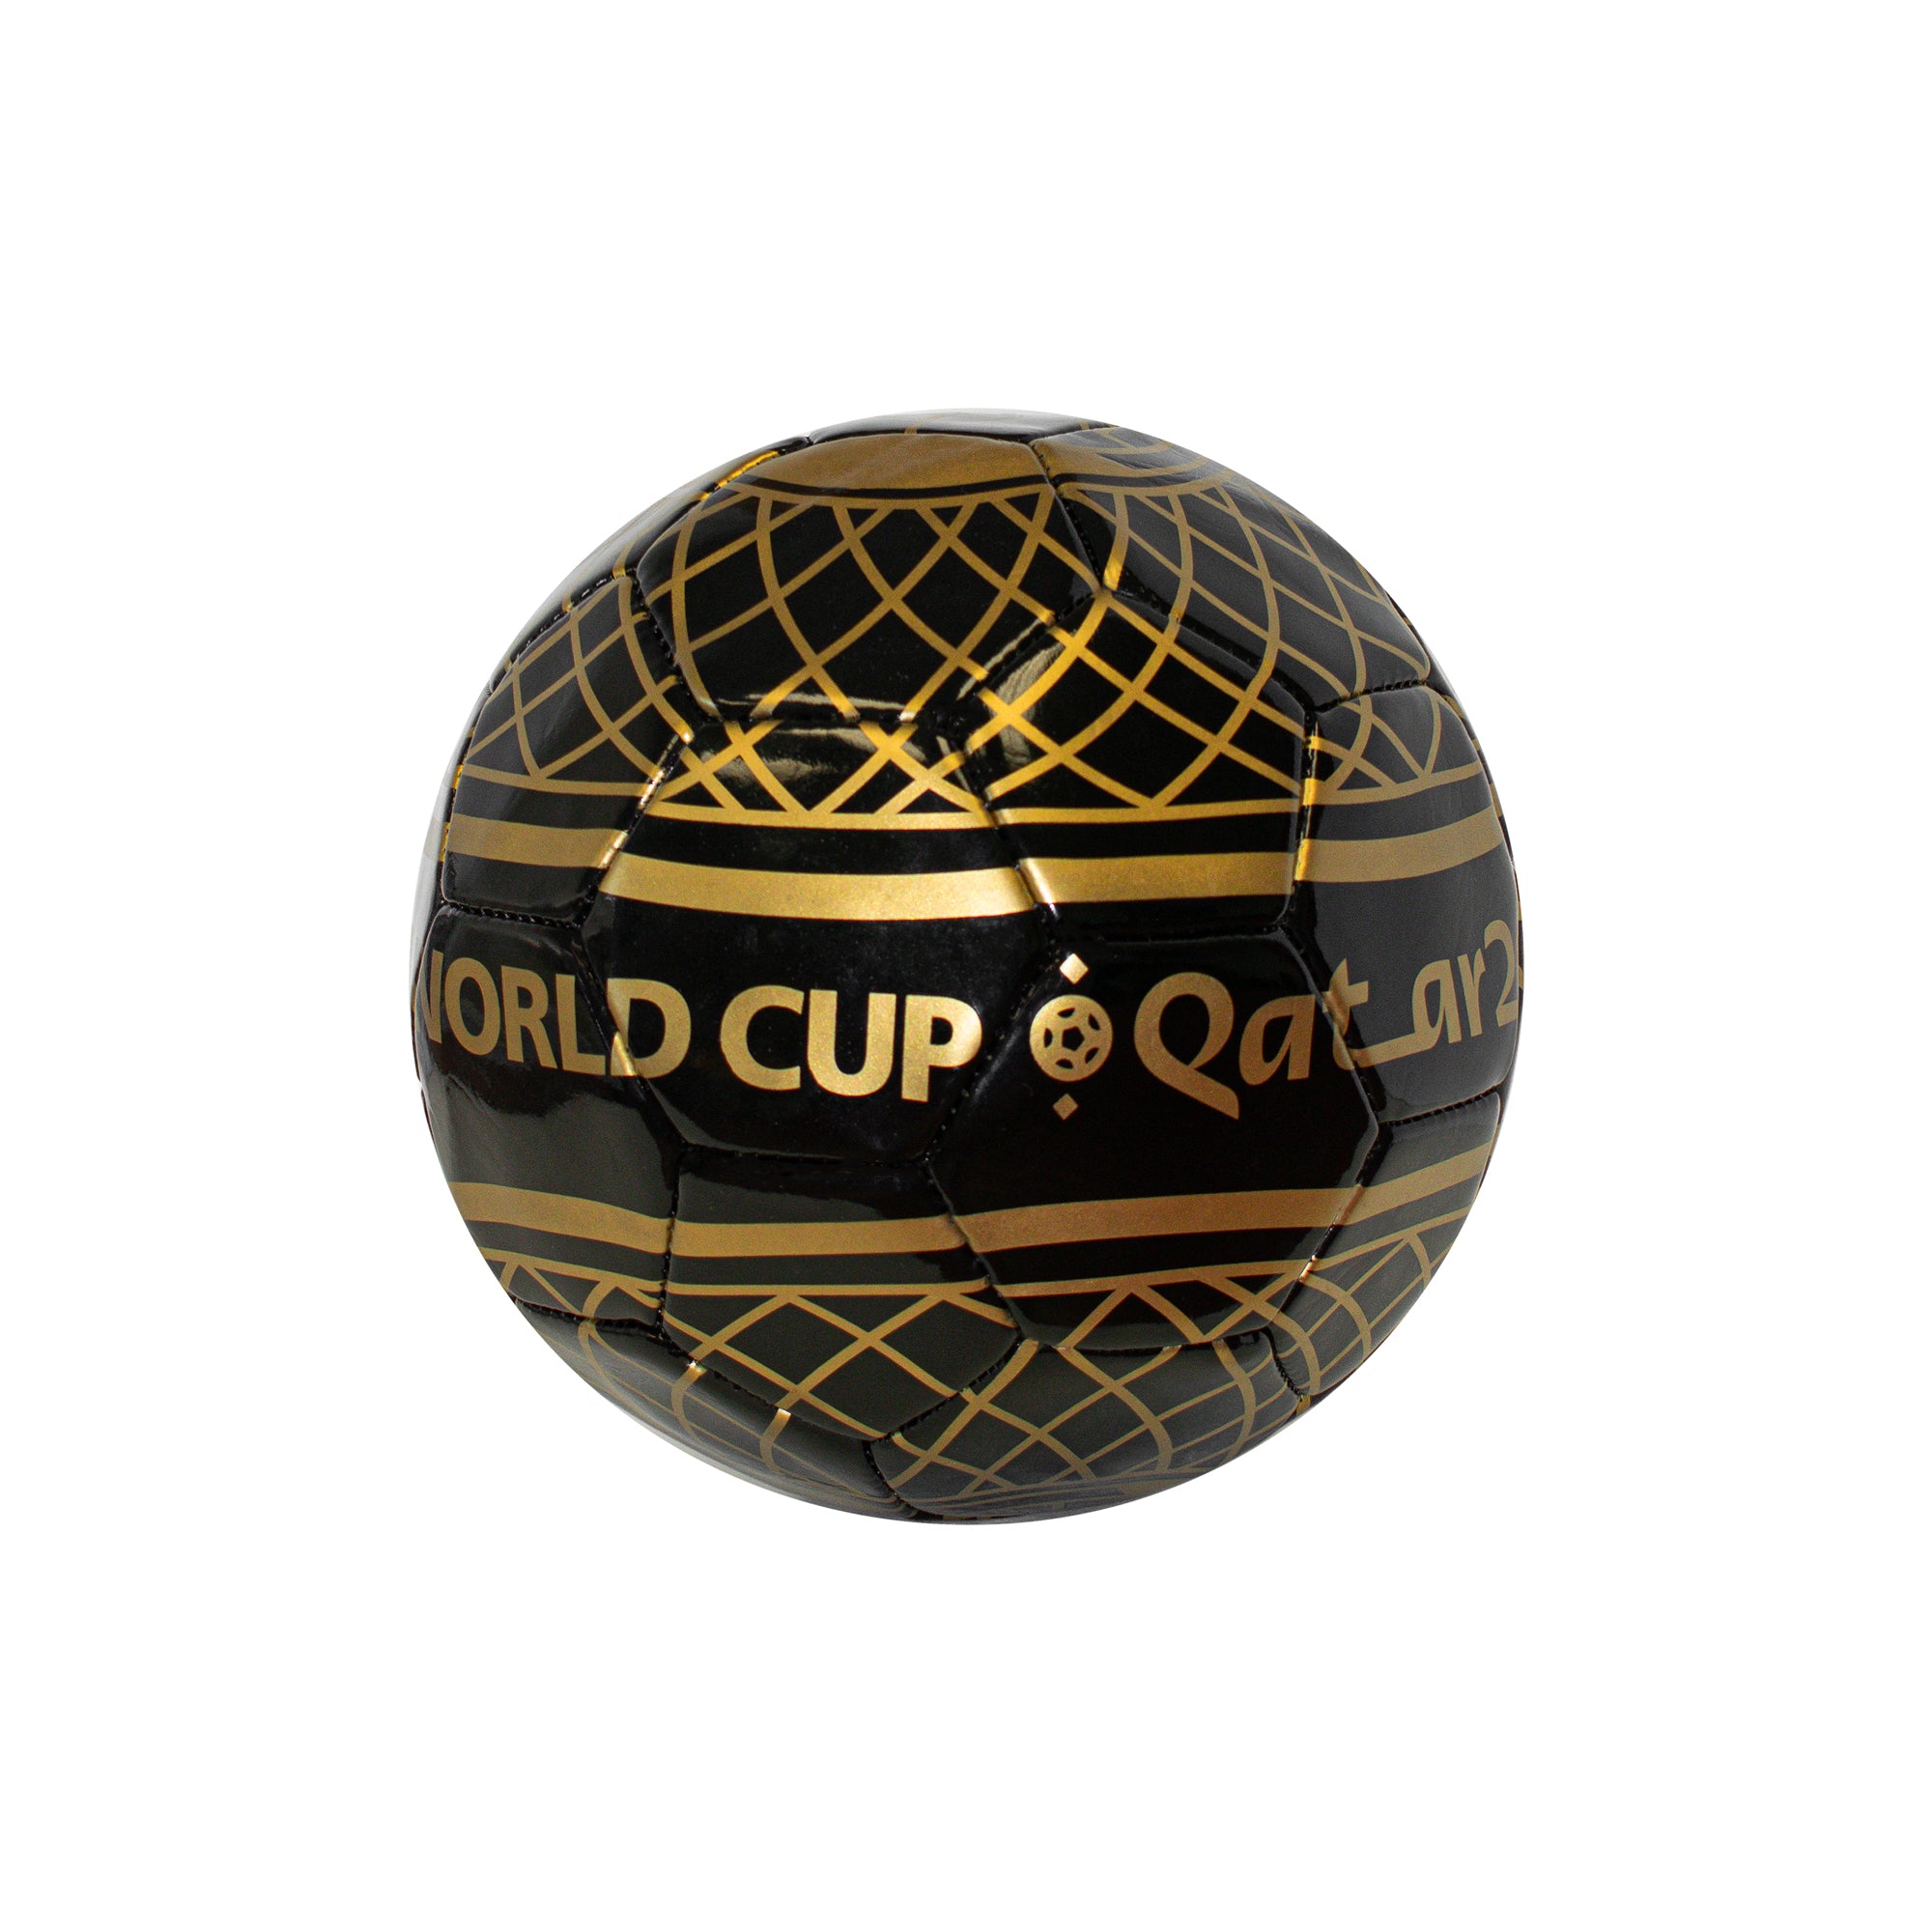 Buy FIFA World Cup 2022 Black and Gold Trophy Ball Online!